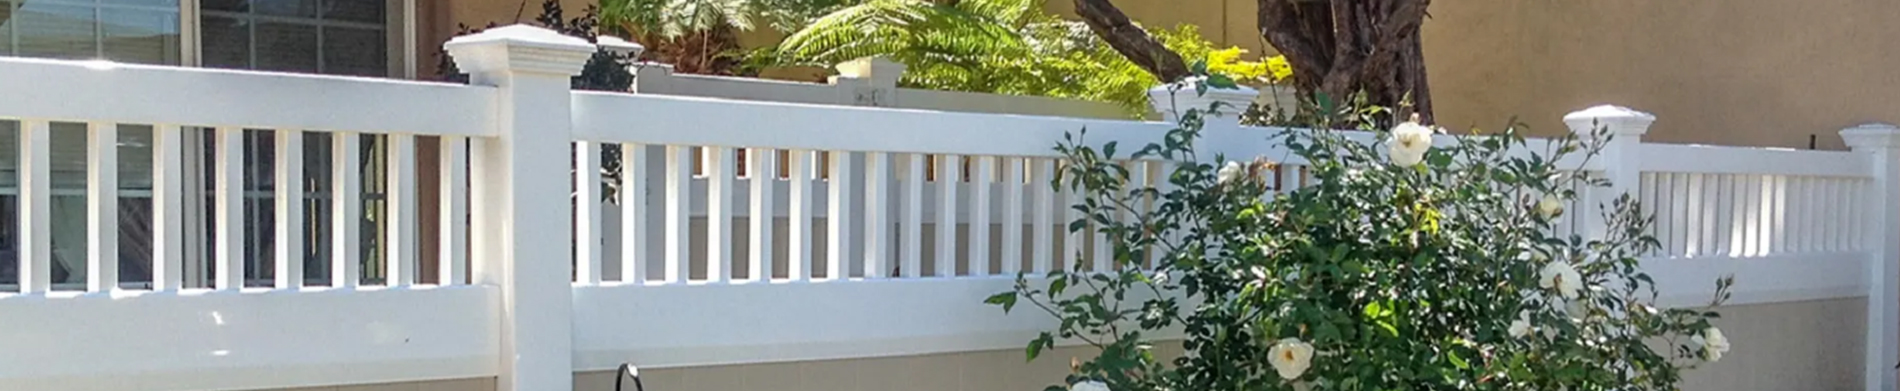 Key Features Of The Best Vinyl Fence For Protecting Your Property